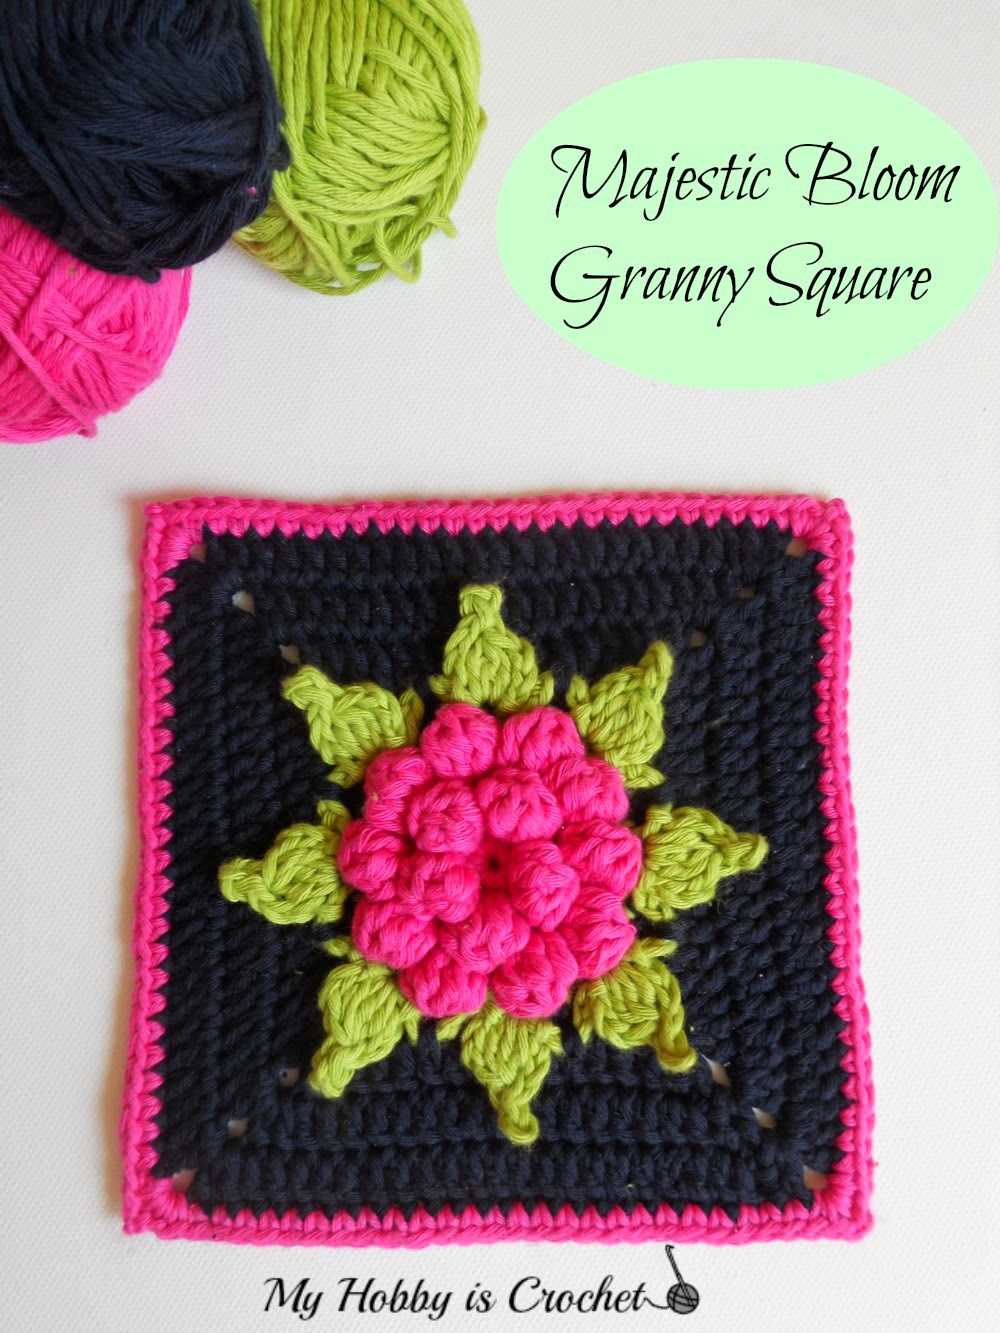 My Hobby Is Crochet Majestic Bloom Granny Square Free Crochet Pattern With Tutorial,Silver Dime Edge